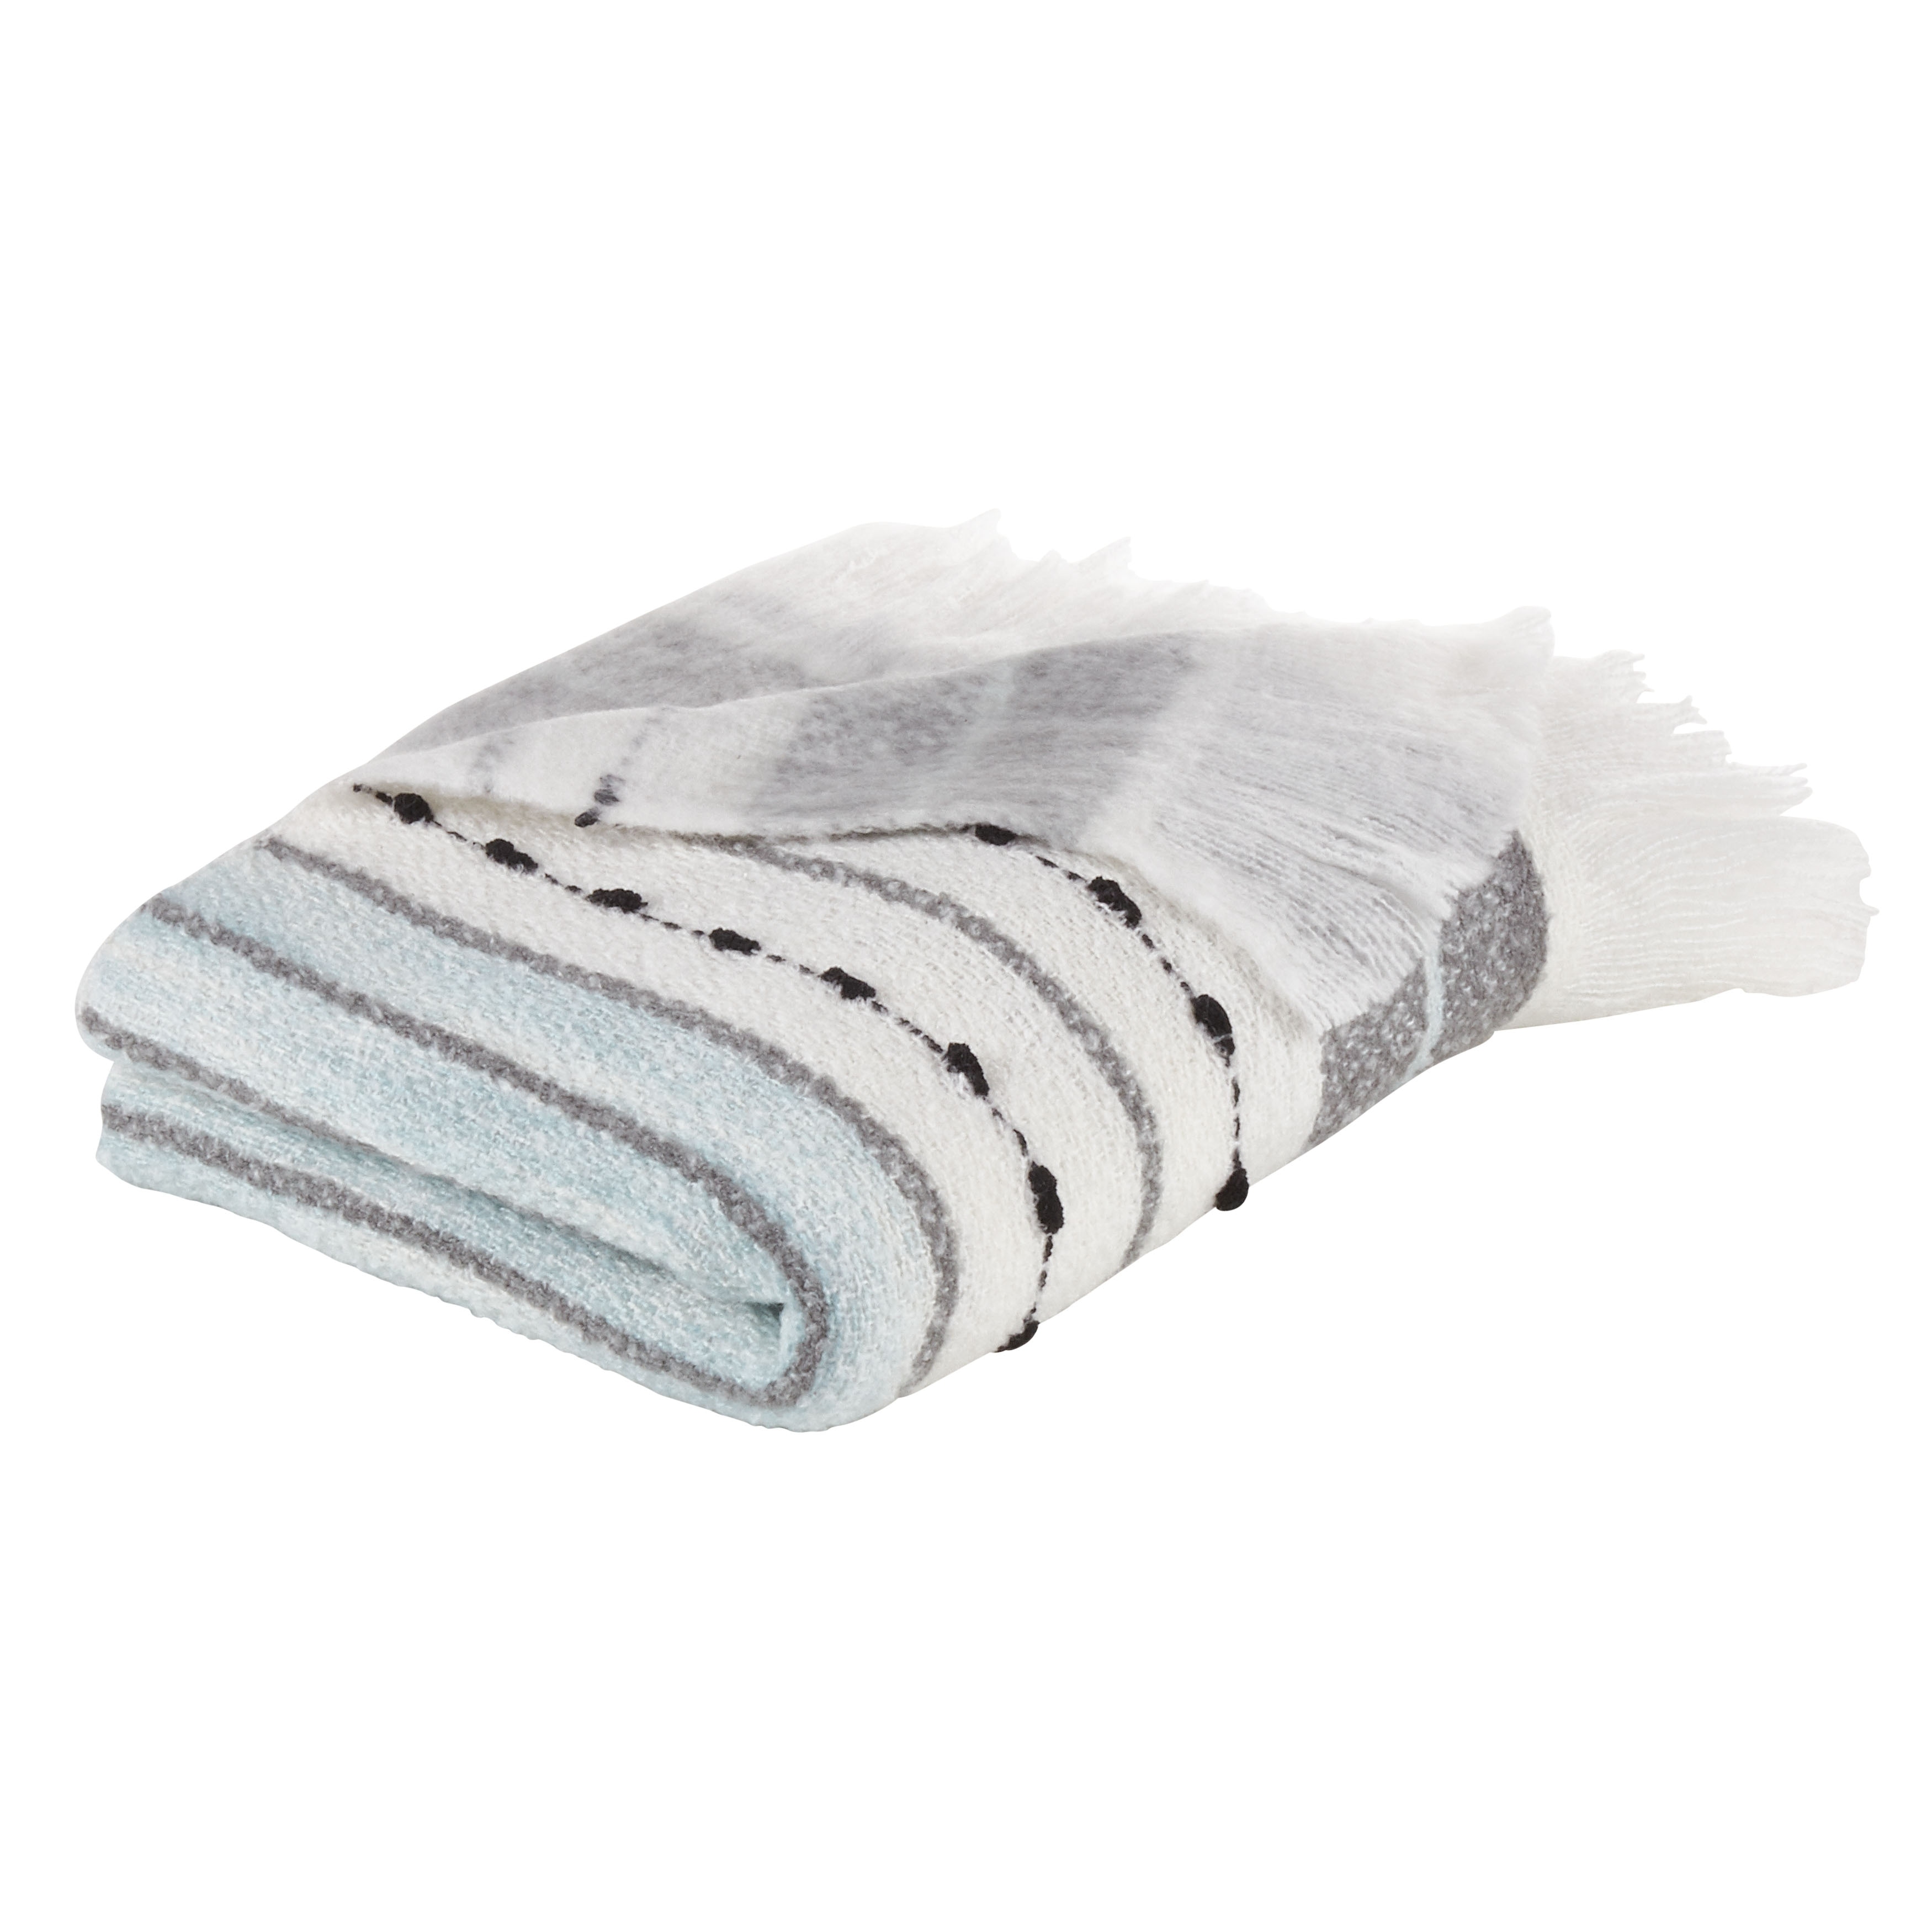 Grey Acrylic, Striped Blankets and Throws | Shop our Best Blankets ...